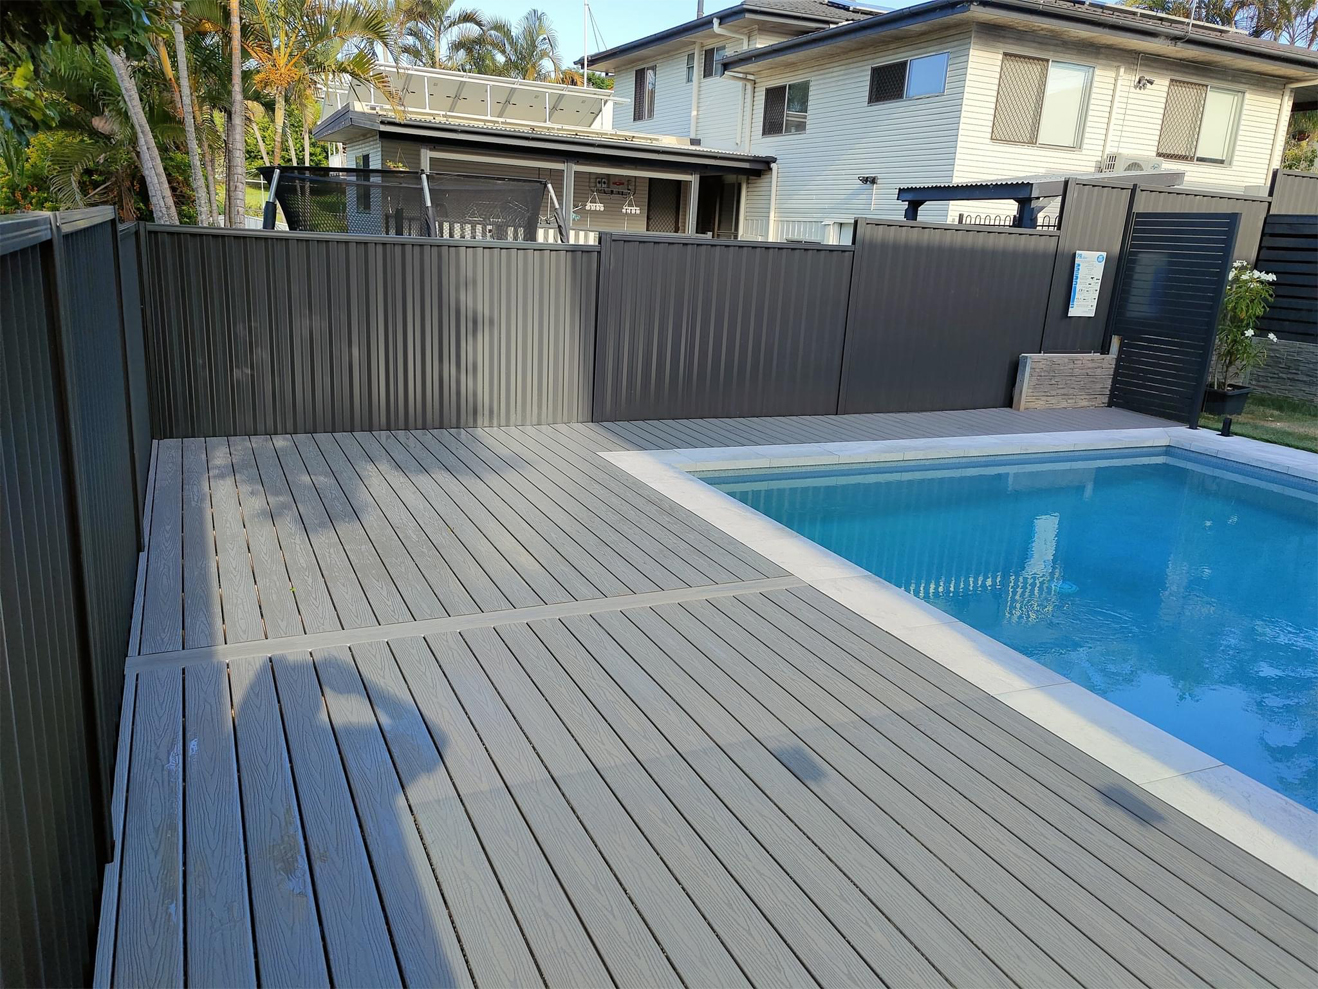 Wood Plastic Composite Decking Used in swimming pool